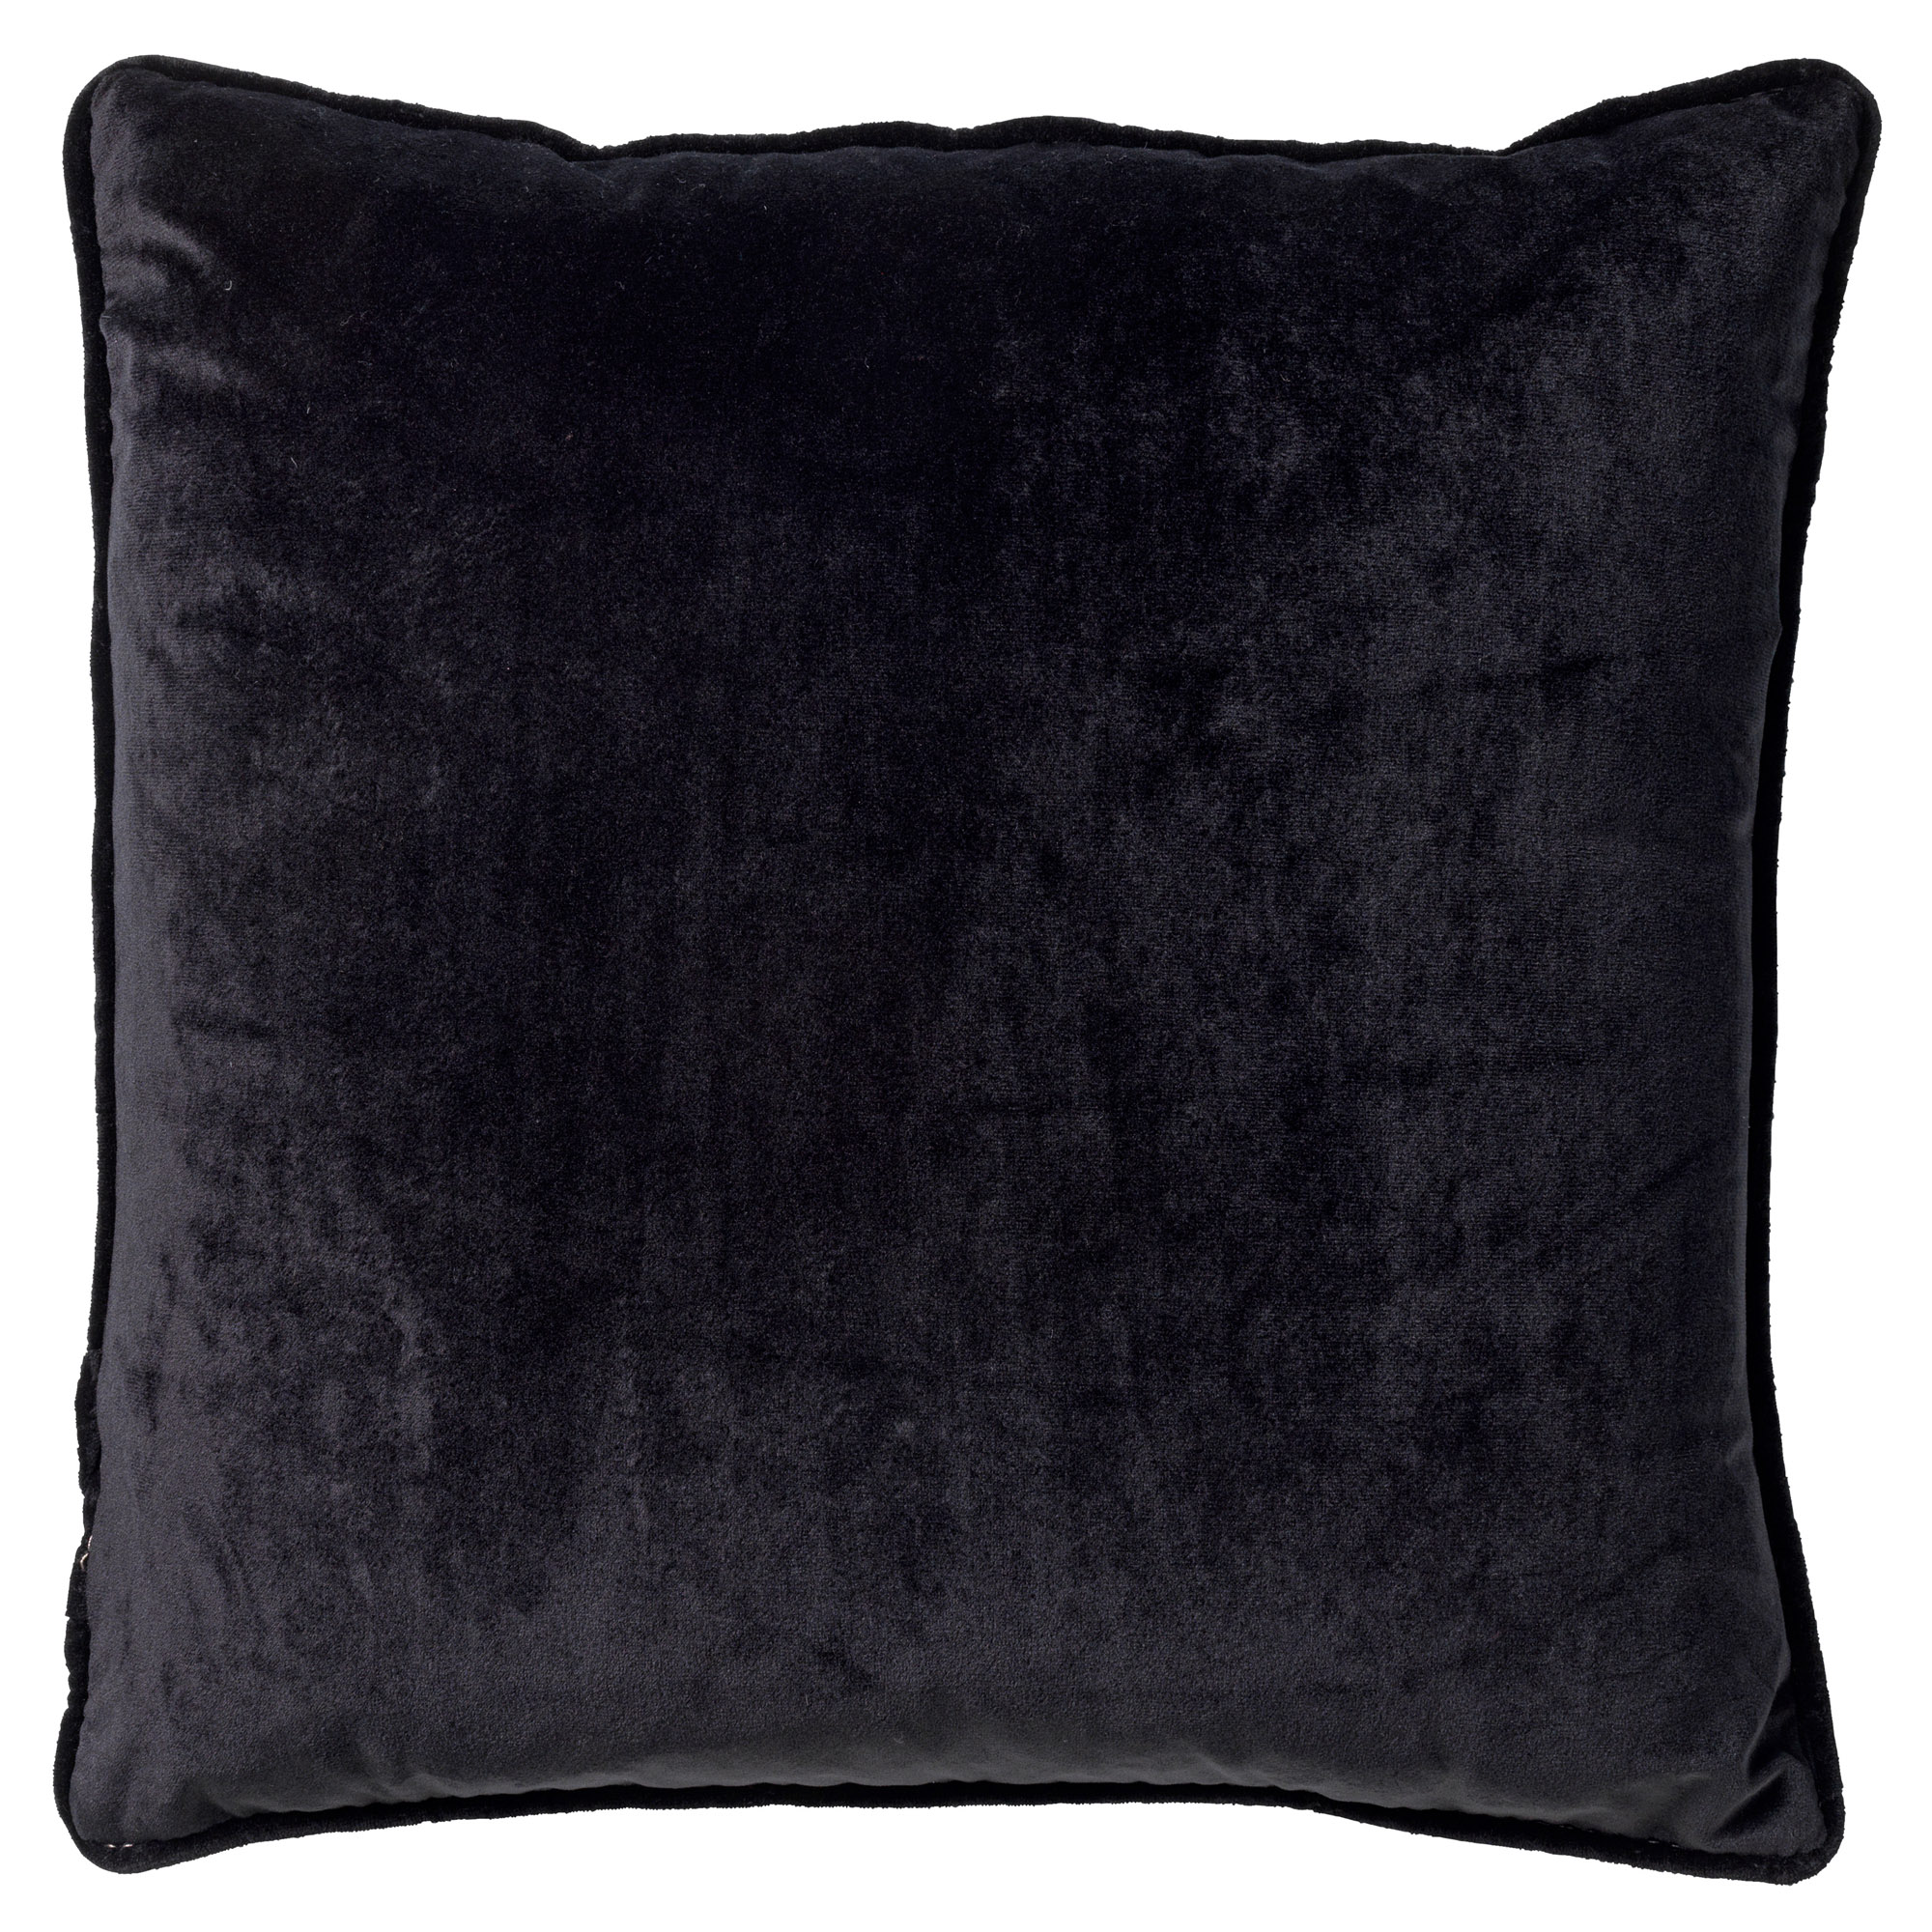 FINNA - Kussenhoes 100% gerecycled polyester - Eco Line collectie 45x45 cm - Raven - zwart